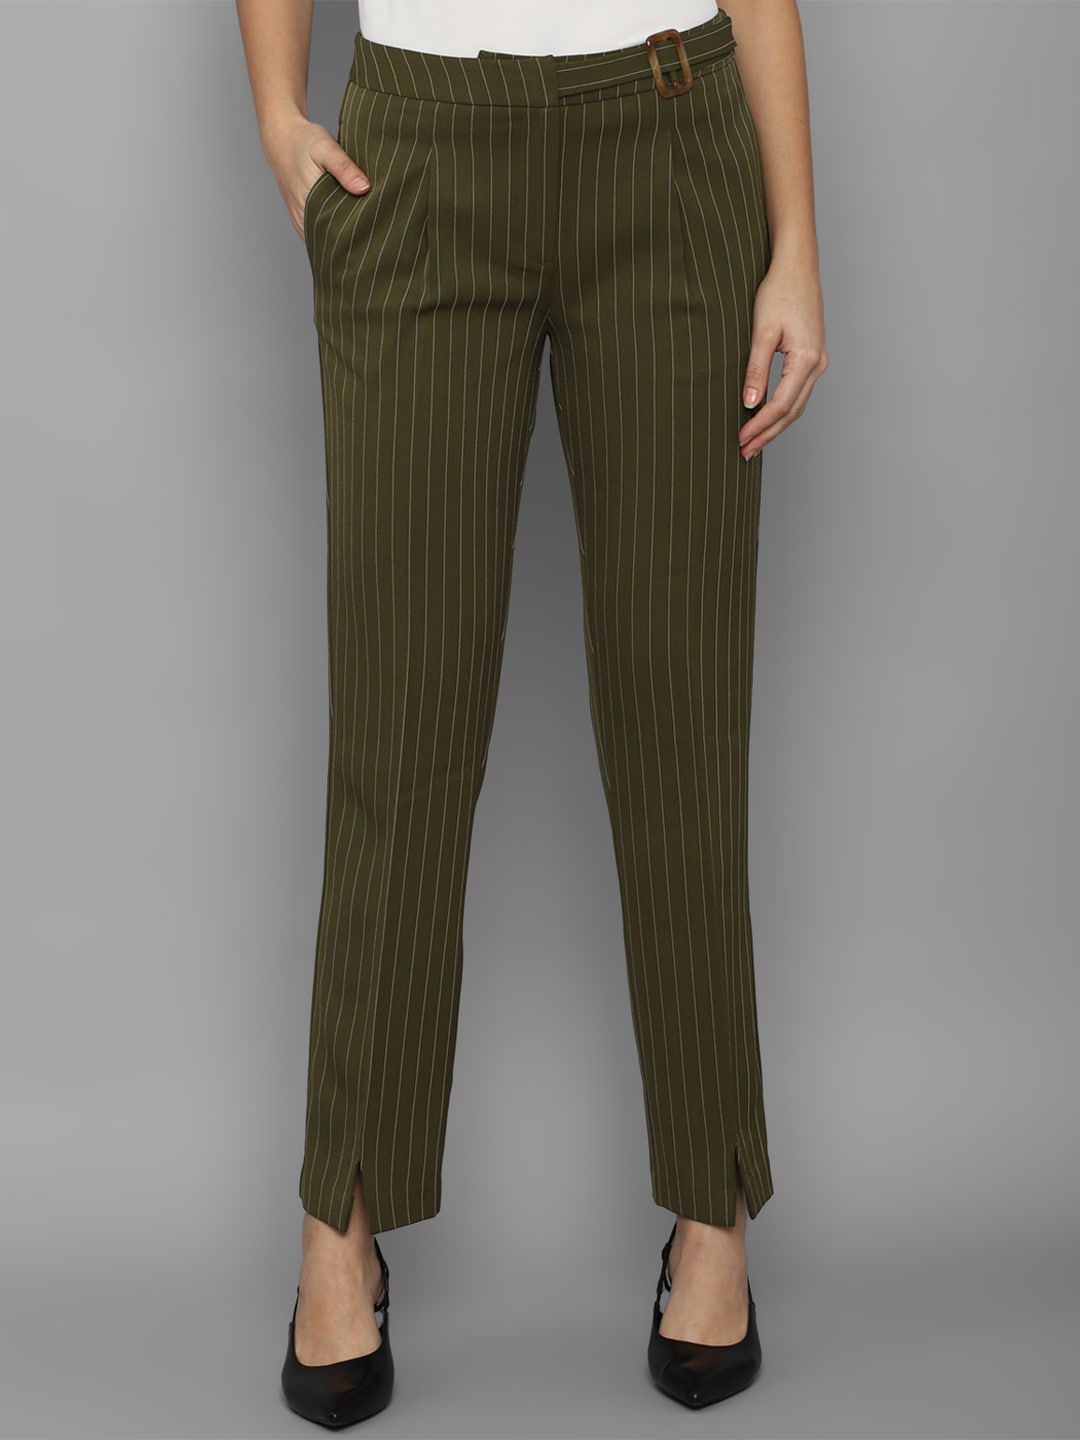 Allen Solly Woman Olive Green Striped Pleated Trousers Price in India